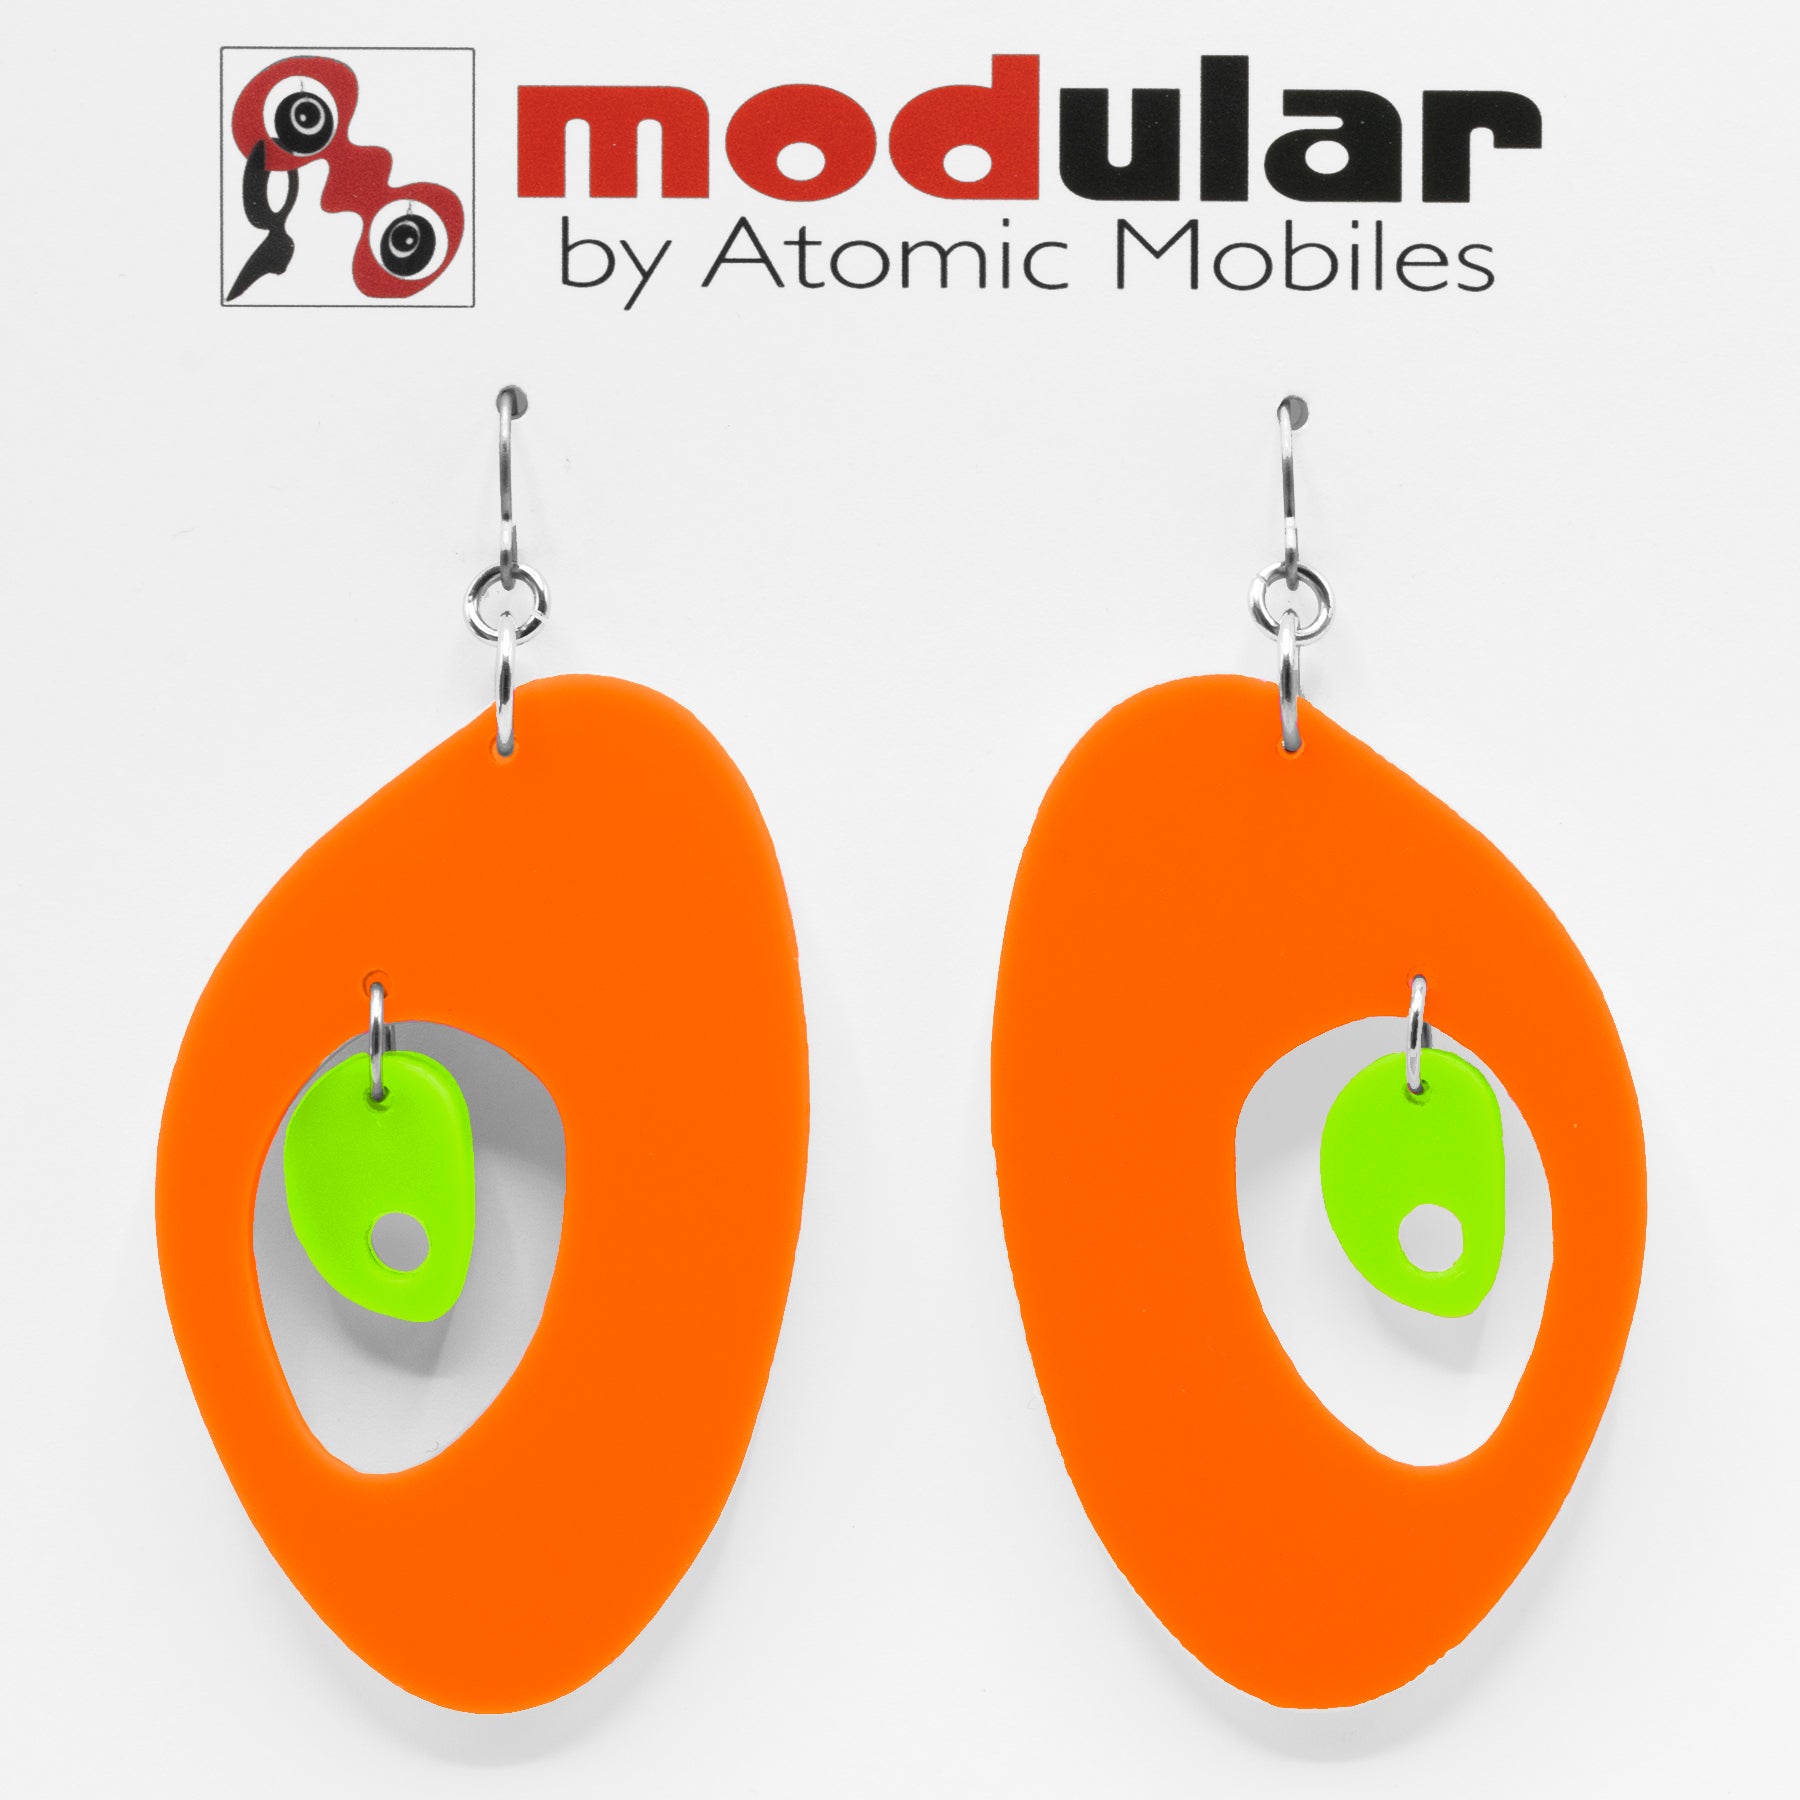 MODular Earrings - The Modernist Statement Earrings in Orange and Lime by AtomicMobiles.com - retro era inspired mod handmade jewelry